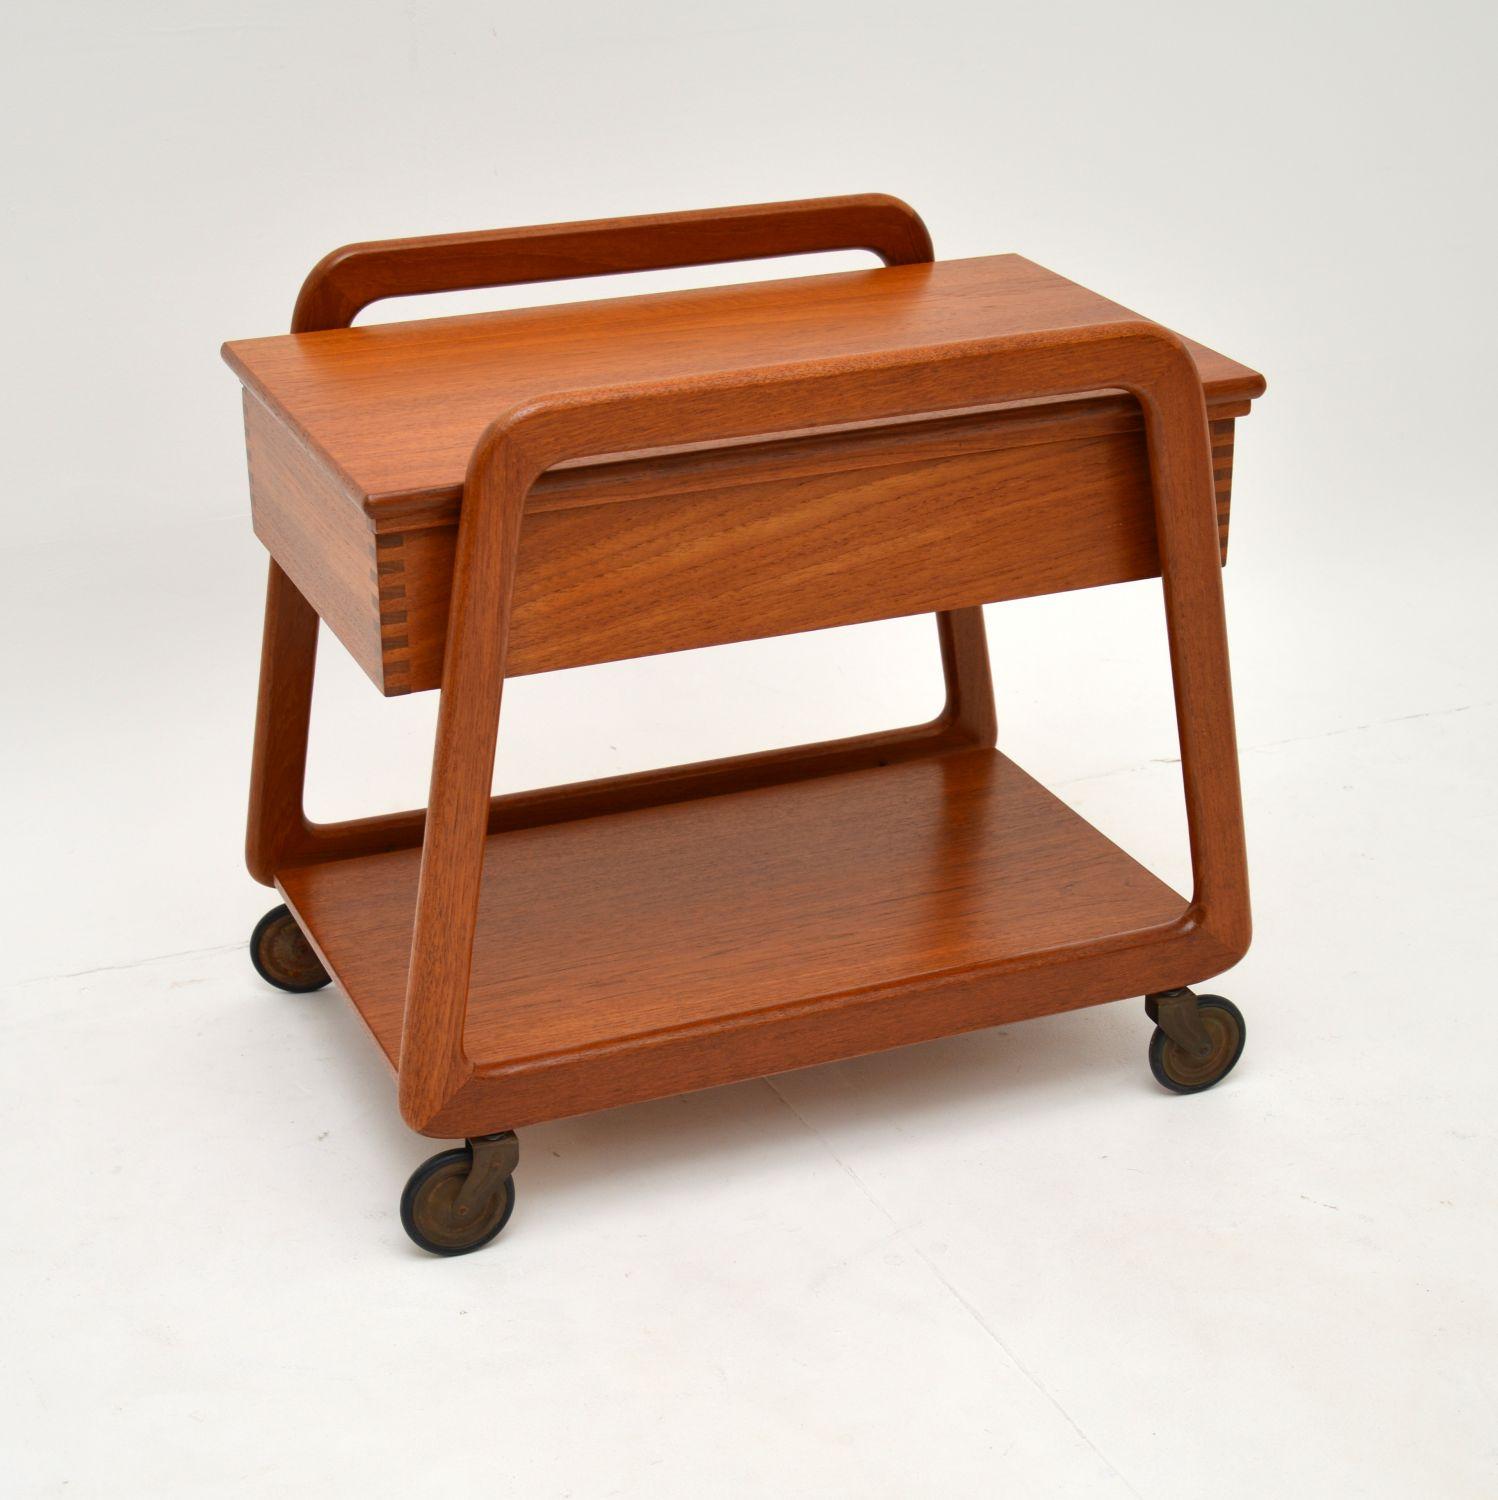 A stylish and useful Danish trolley table on casters. This was made in Denmark by Sika mobler, it dates from the 1960’s.

The quality is outstanding and this is a very practical item. It was originally designed as a sewing side table, with various